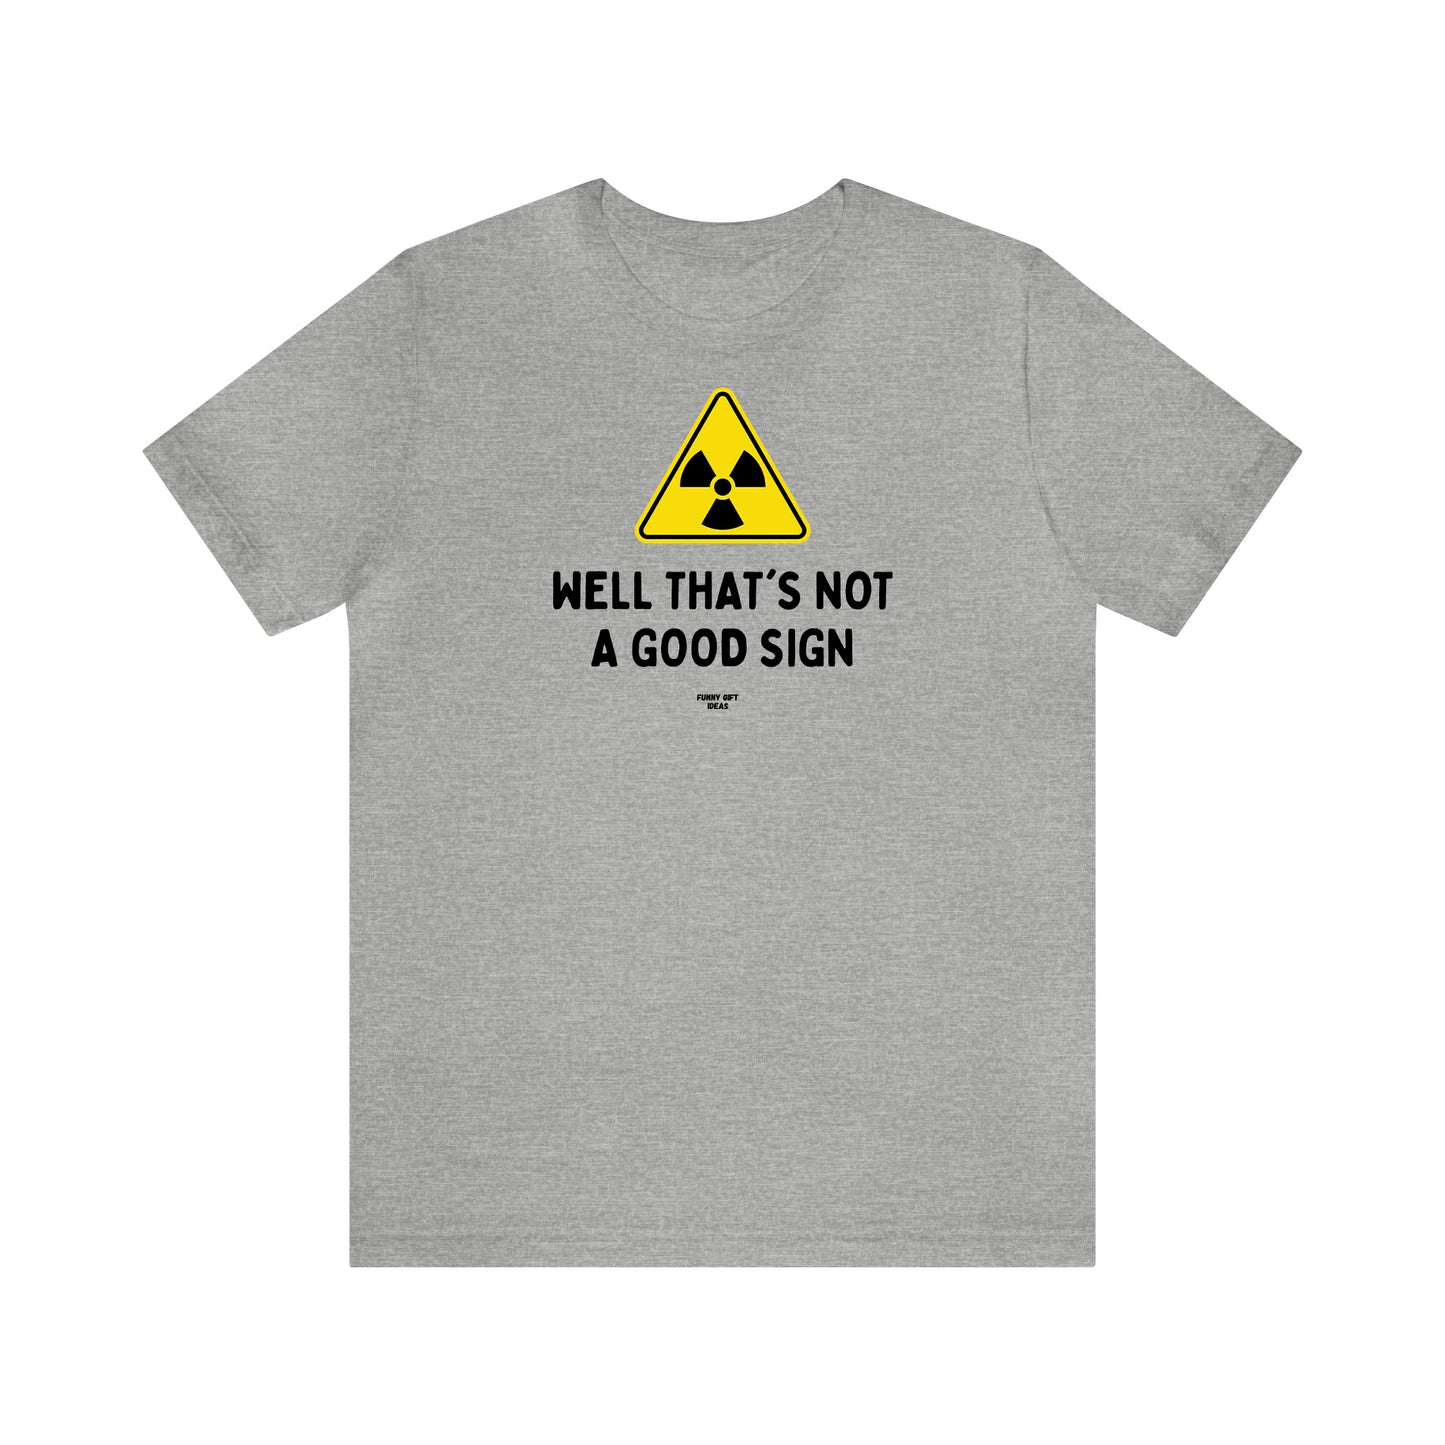 Mens T Shirts - Well That's Not a Good Sign - Funny Men T Shirts